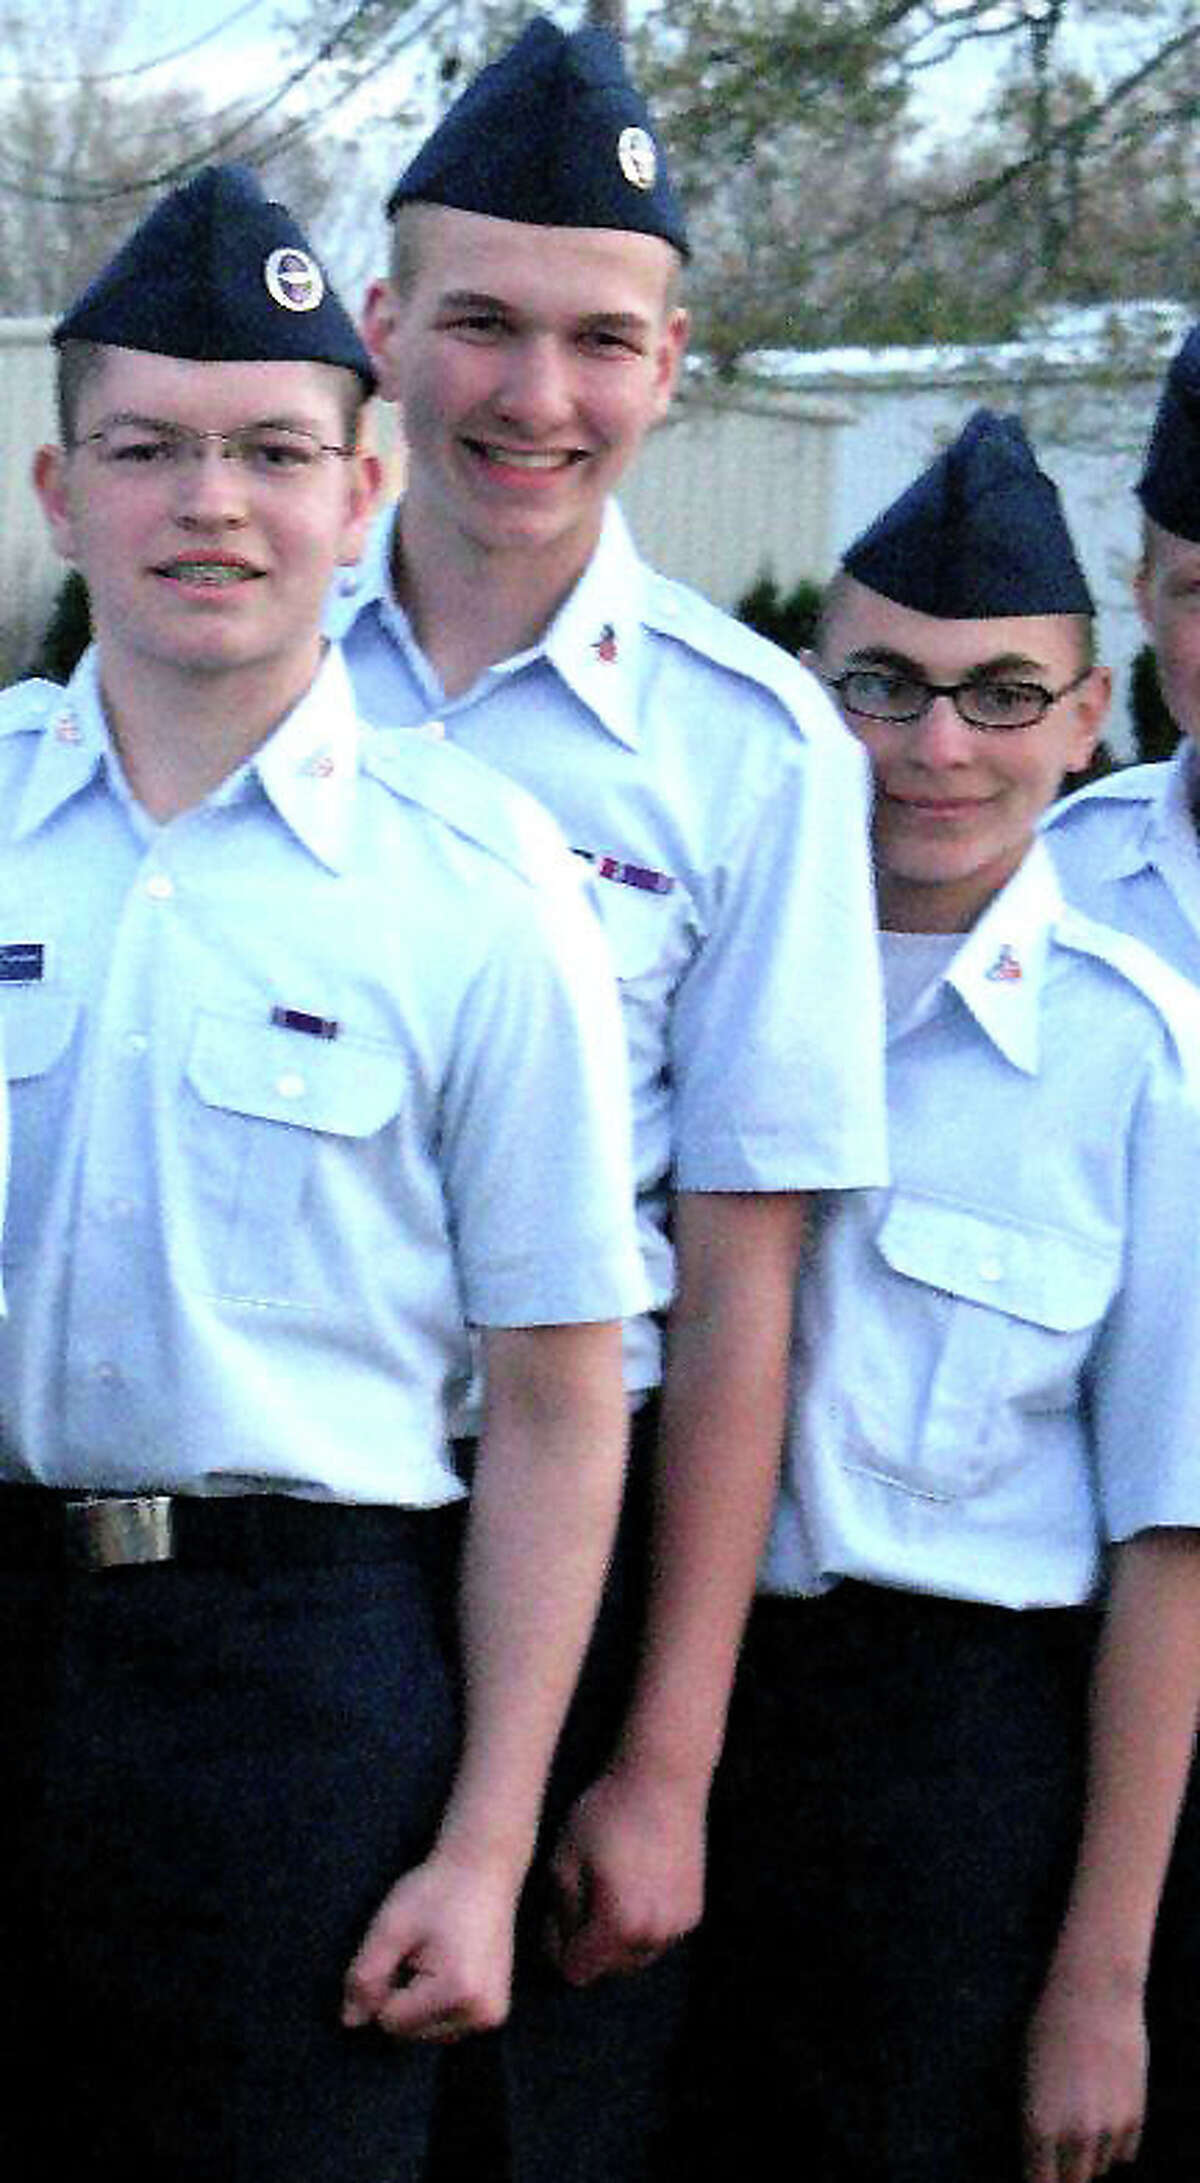 Andre Vasquez, left, and Tyler Giuliano, right, are shown in a Civil Air Patrol encampment photo taken April 2012.